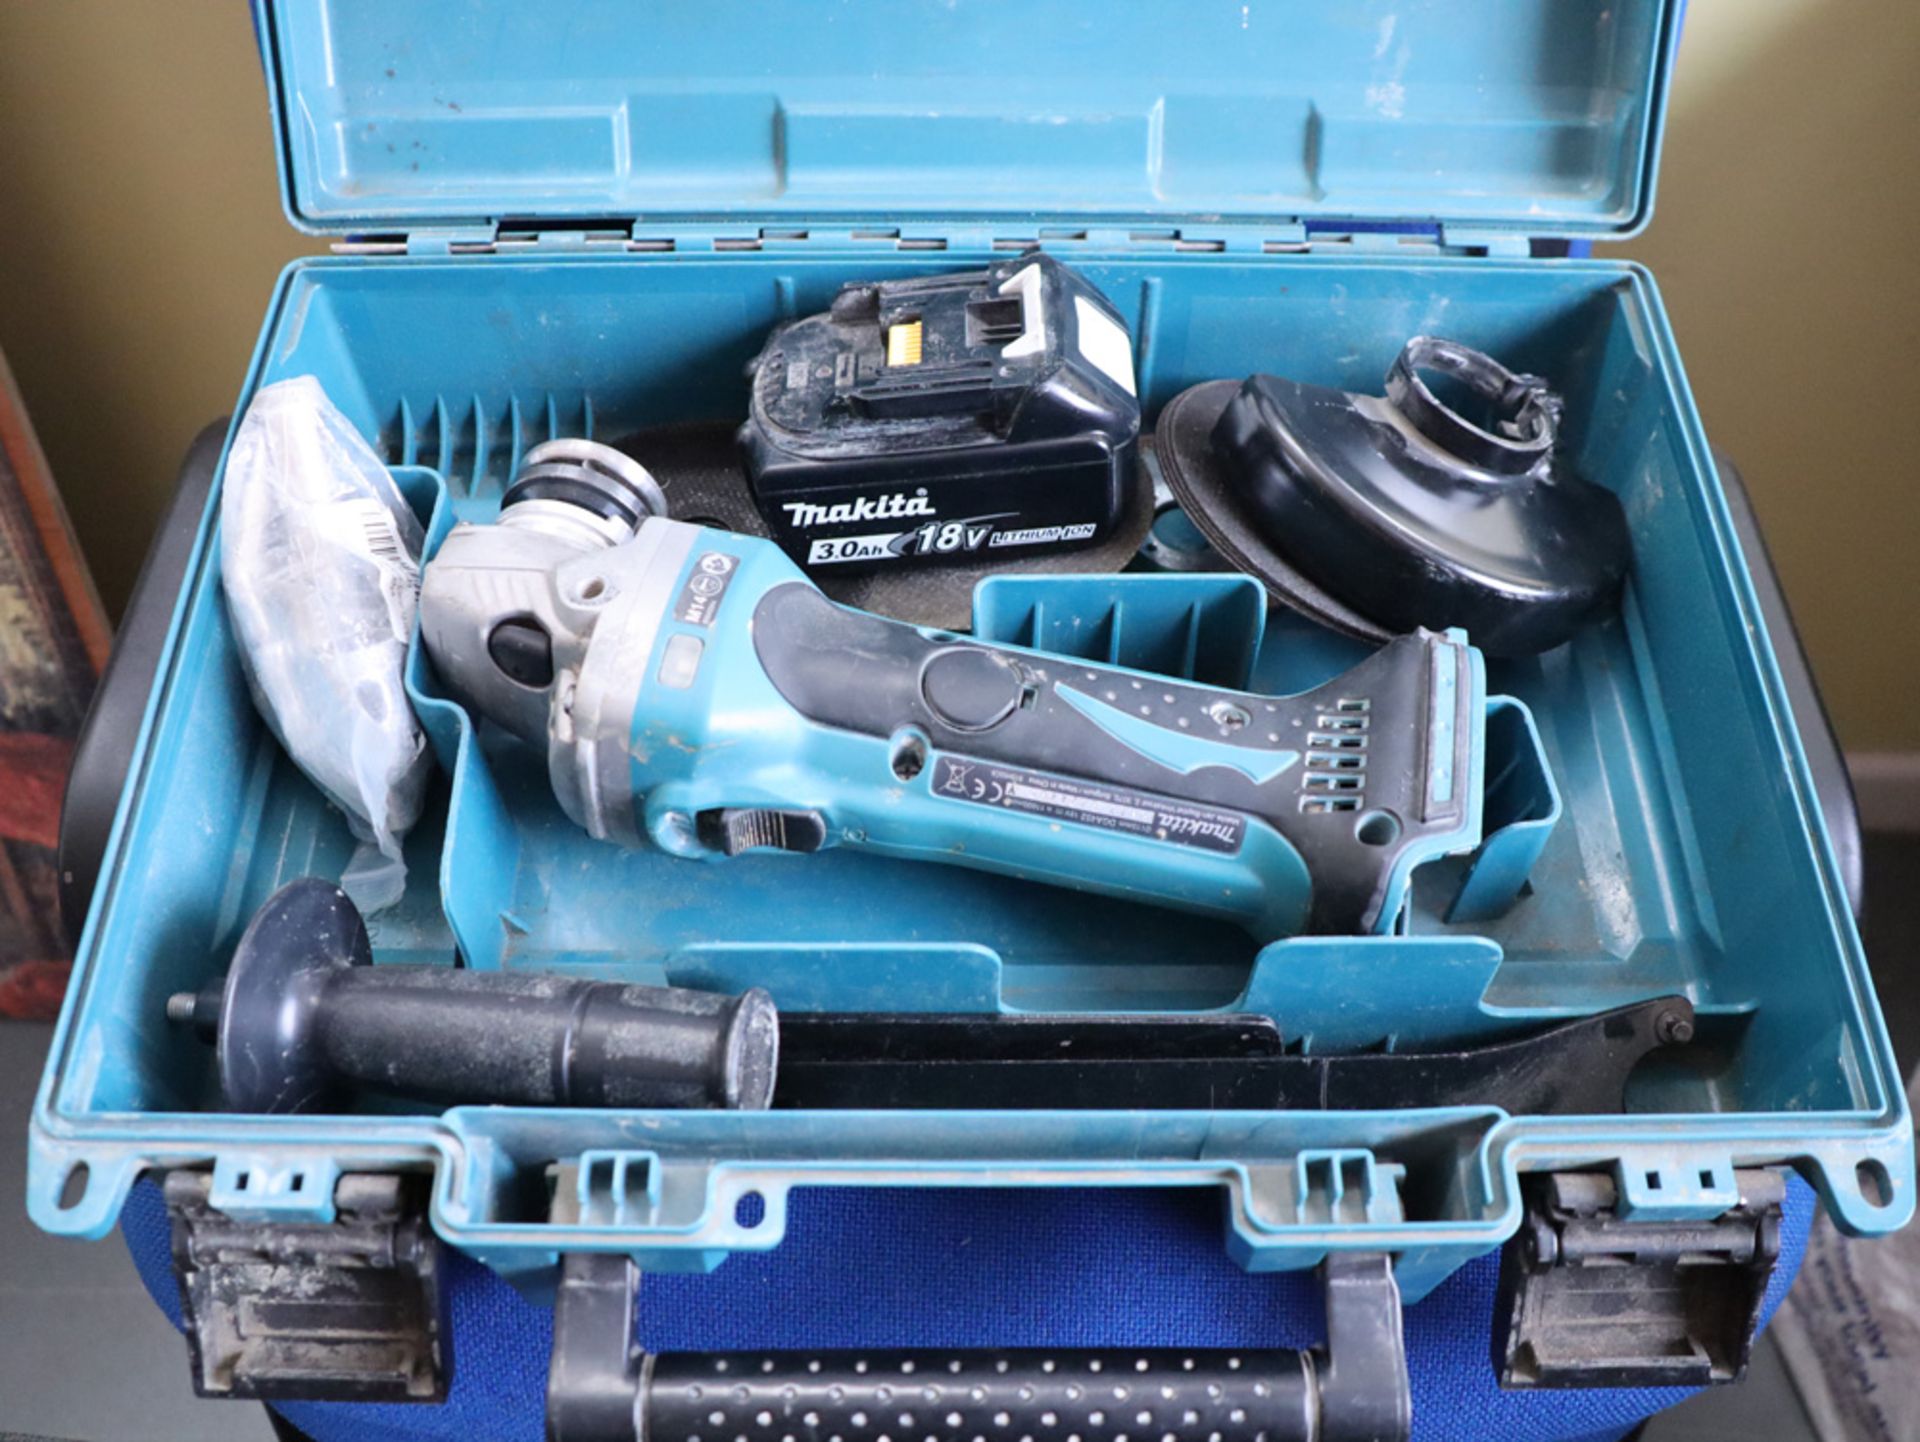 Makita DGA452 battery operated 4.5'' angle grinder (Battery included, no charger)